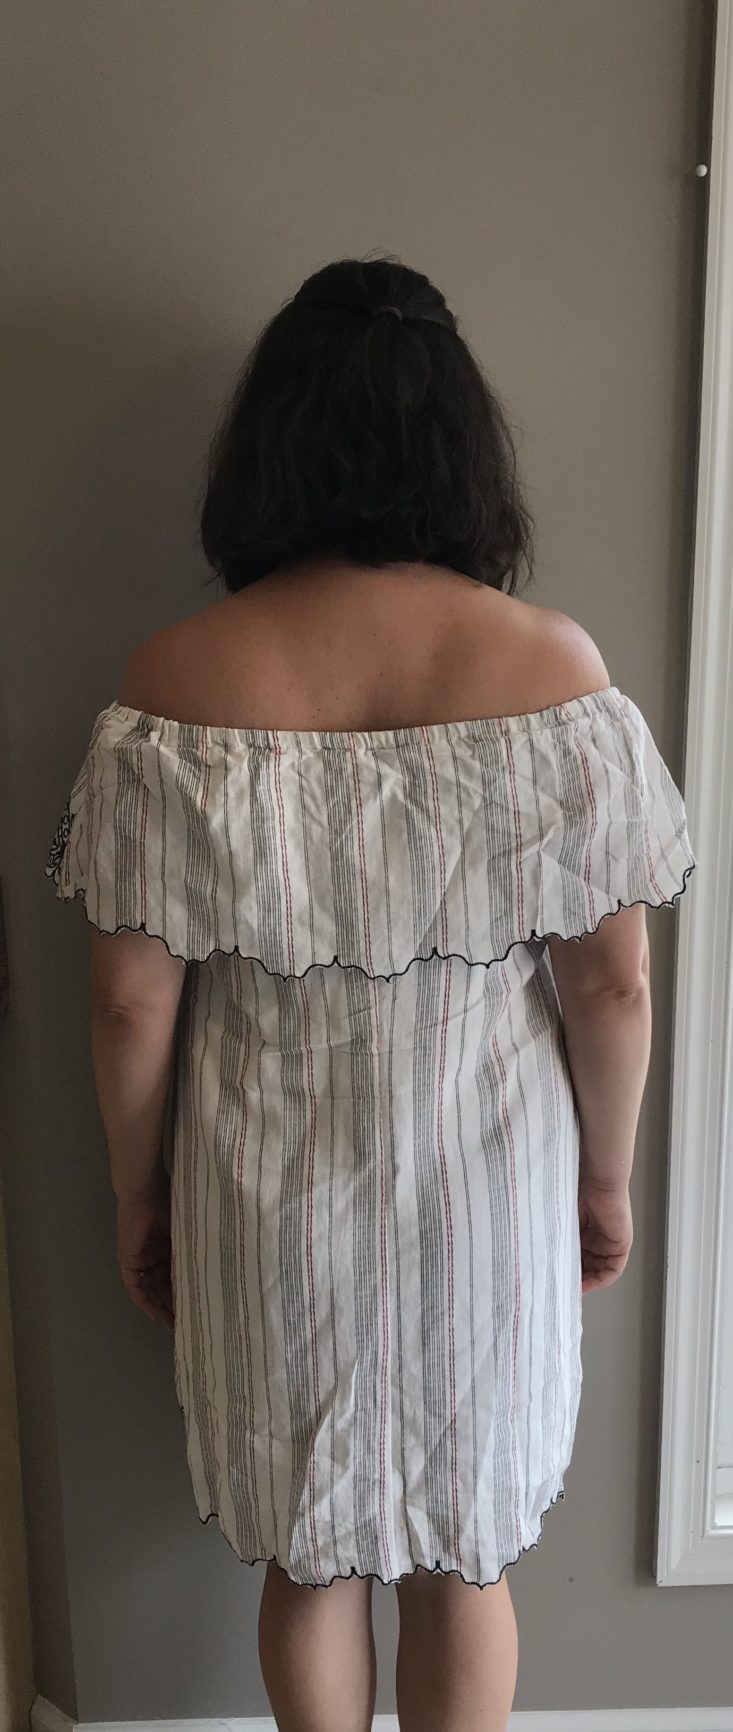 My Fashion Crate Subscription Box Review May 2018 - 27) dress back